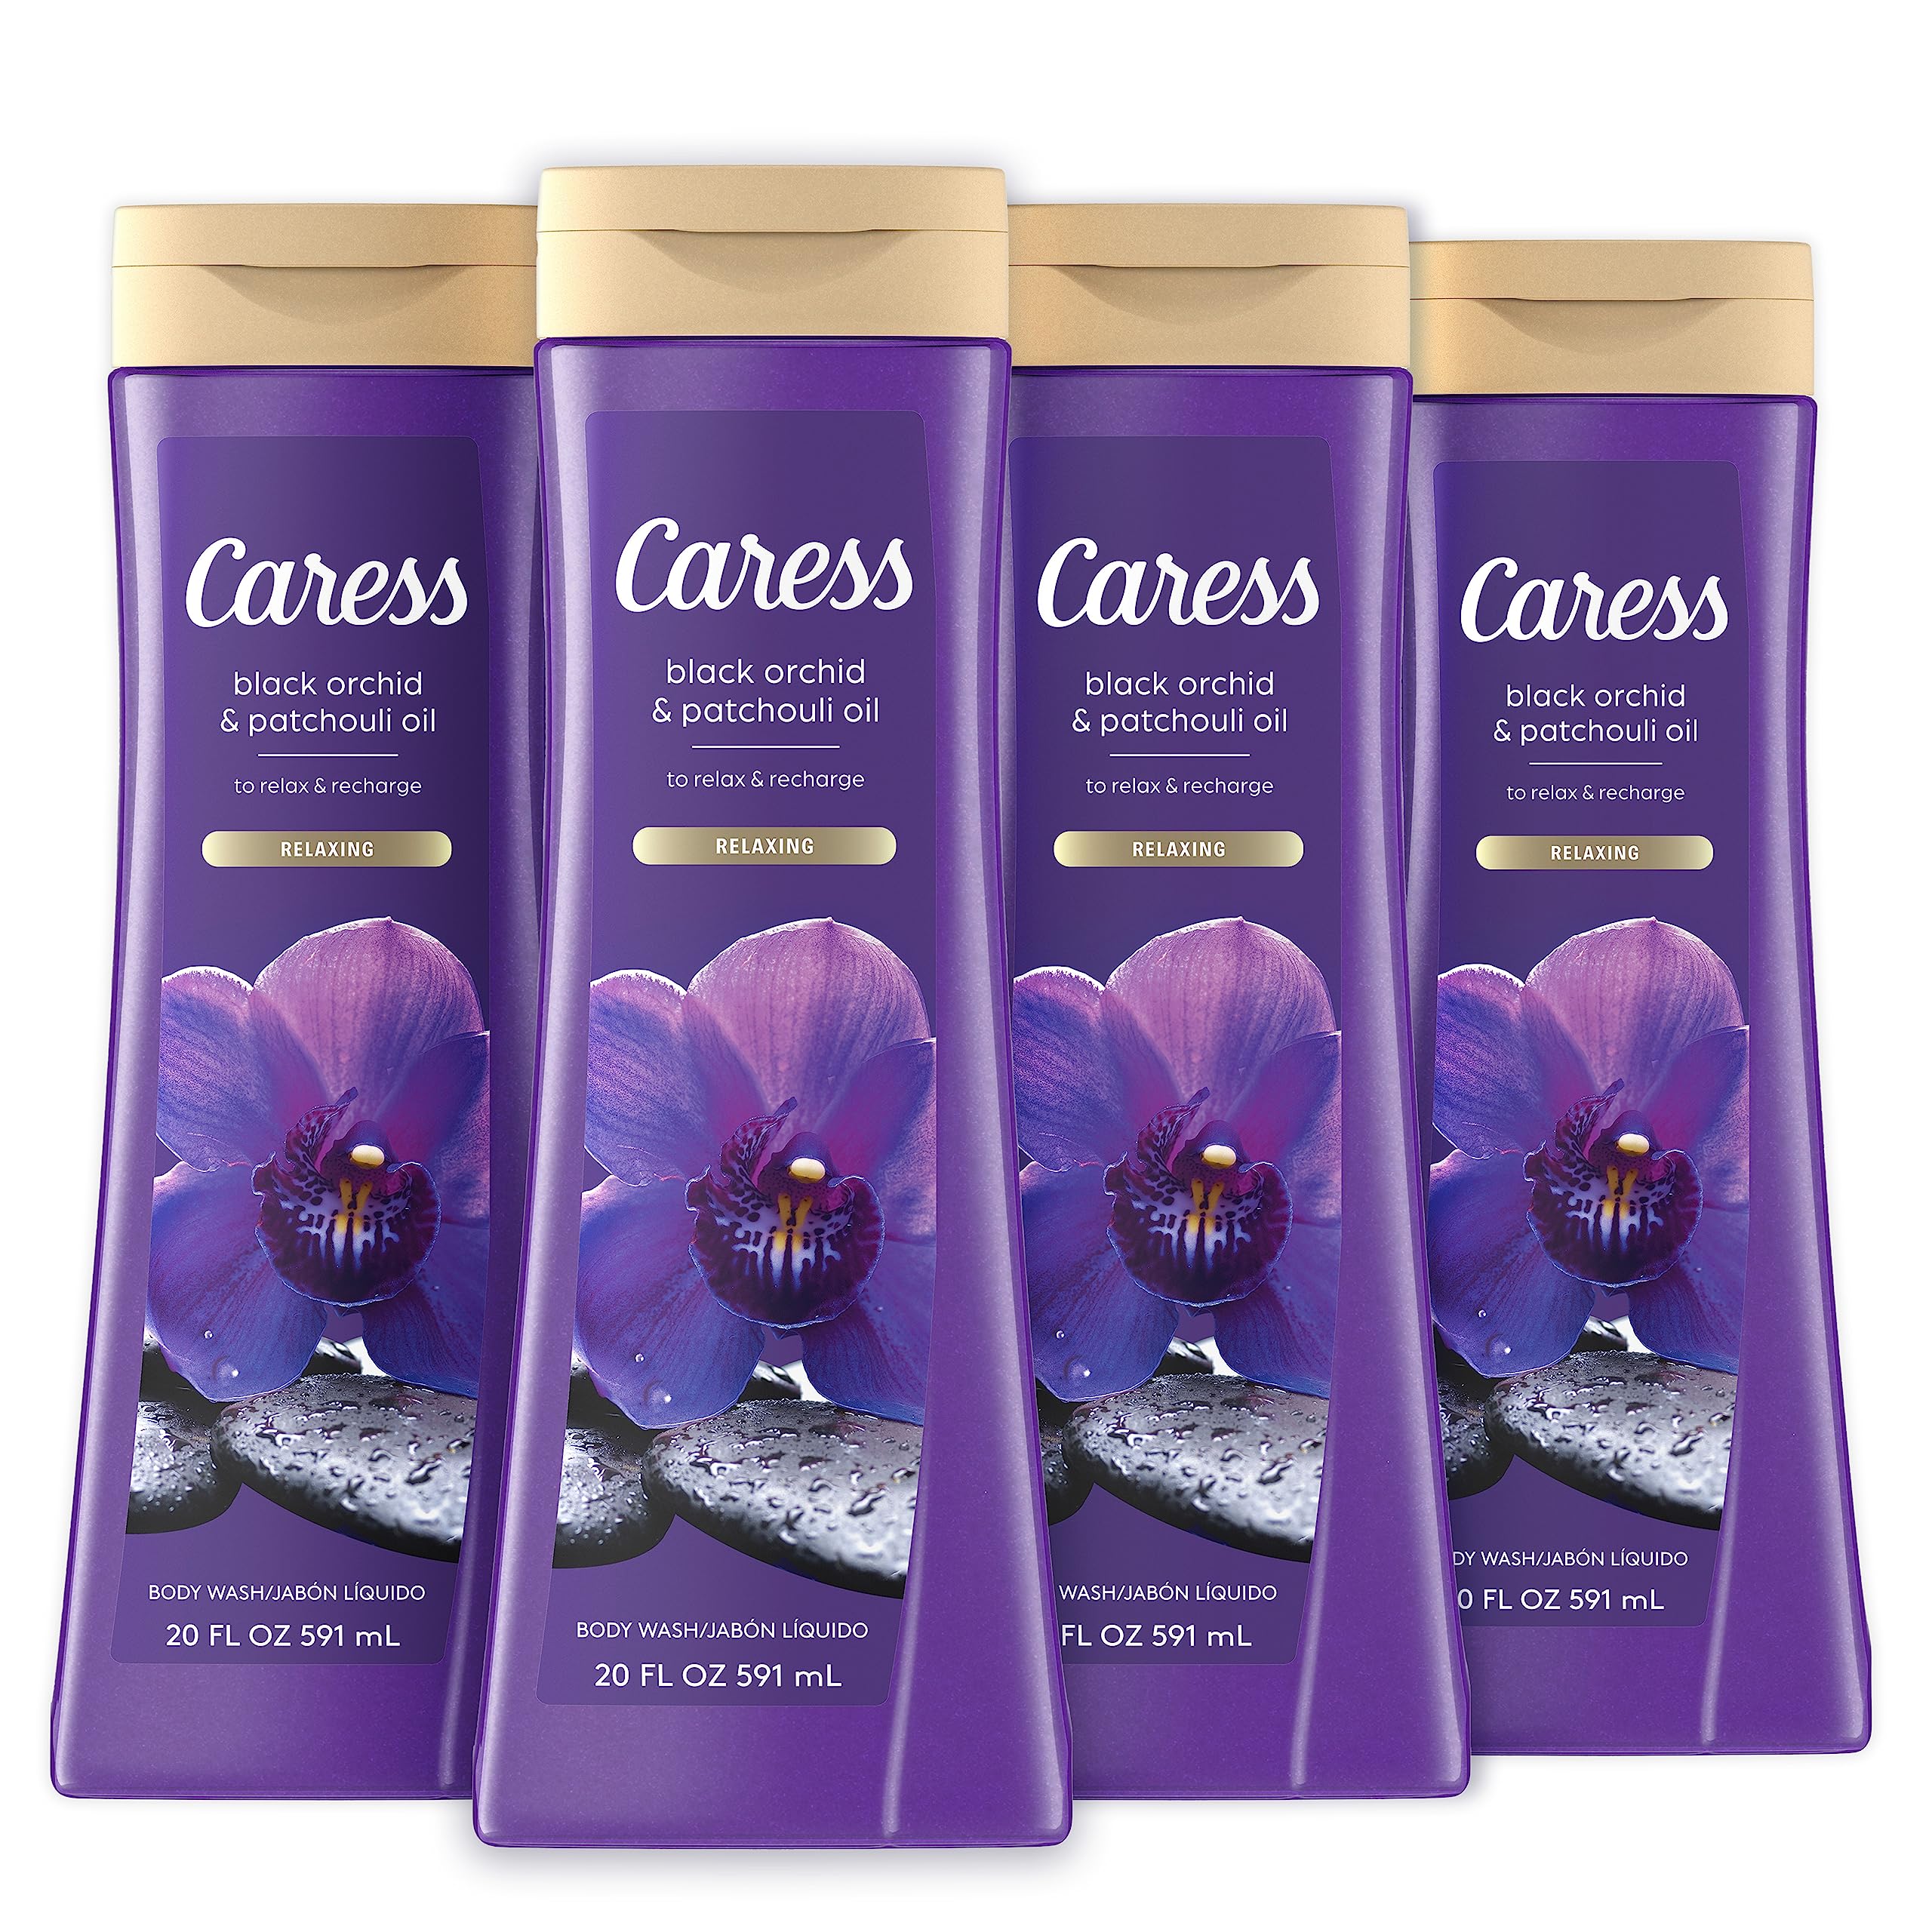 Caress Body Wash Black Orchid & Patchouli Oil To Relax and Recharge Relaxing, Fragrant Body Soap 20 fl oz, Pack of 4